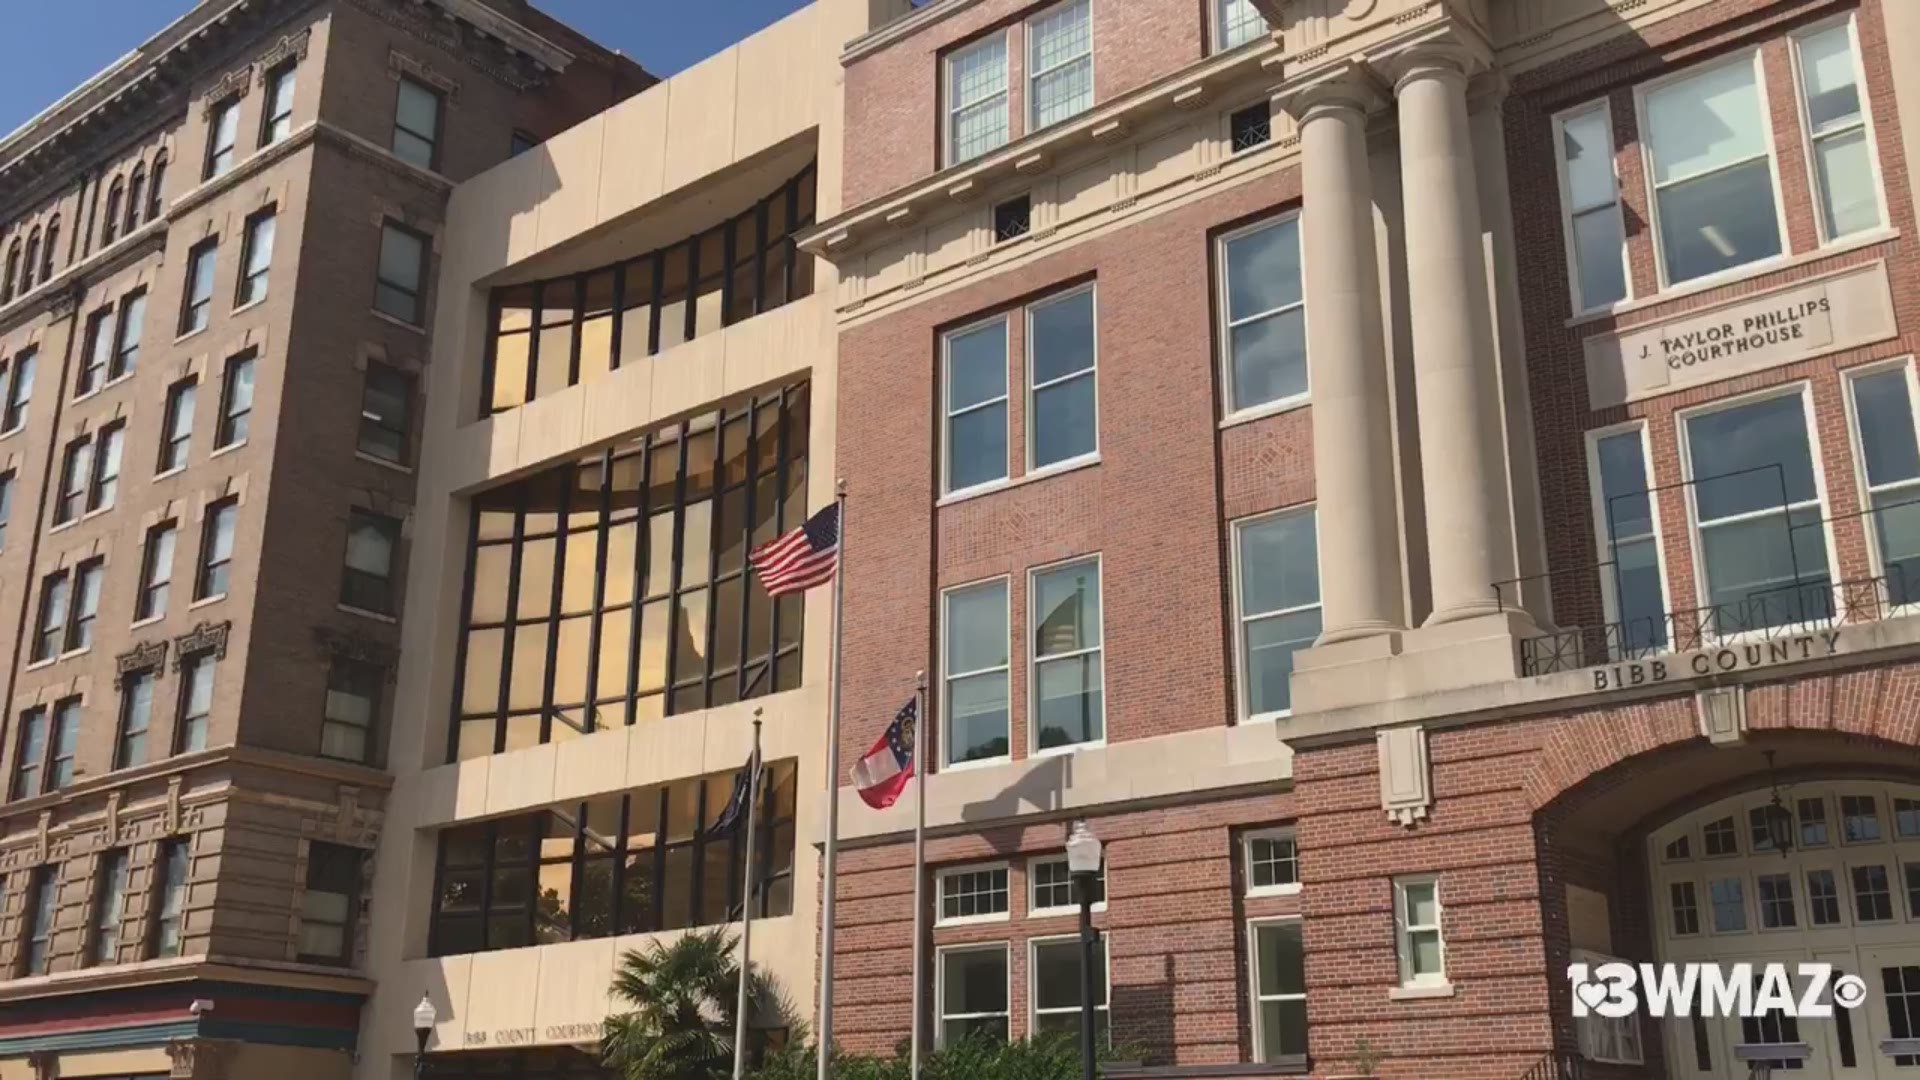 Bibb County commissioners approved spending $10,000 to draw up plans for a new parking deck in downtown Macon.